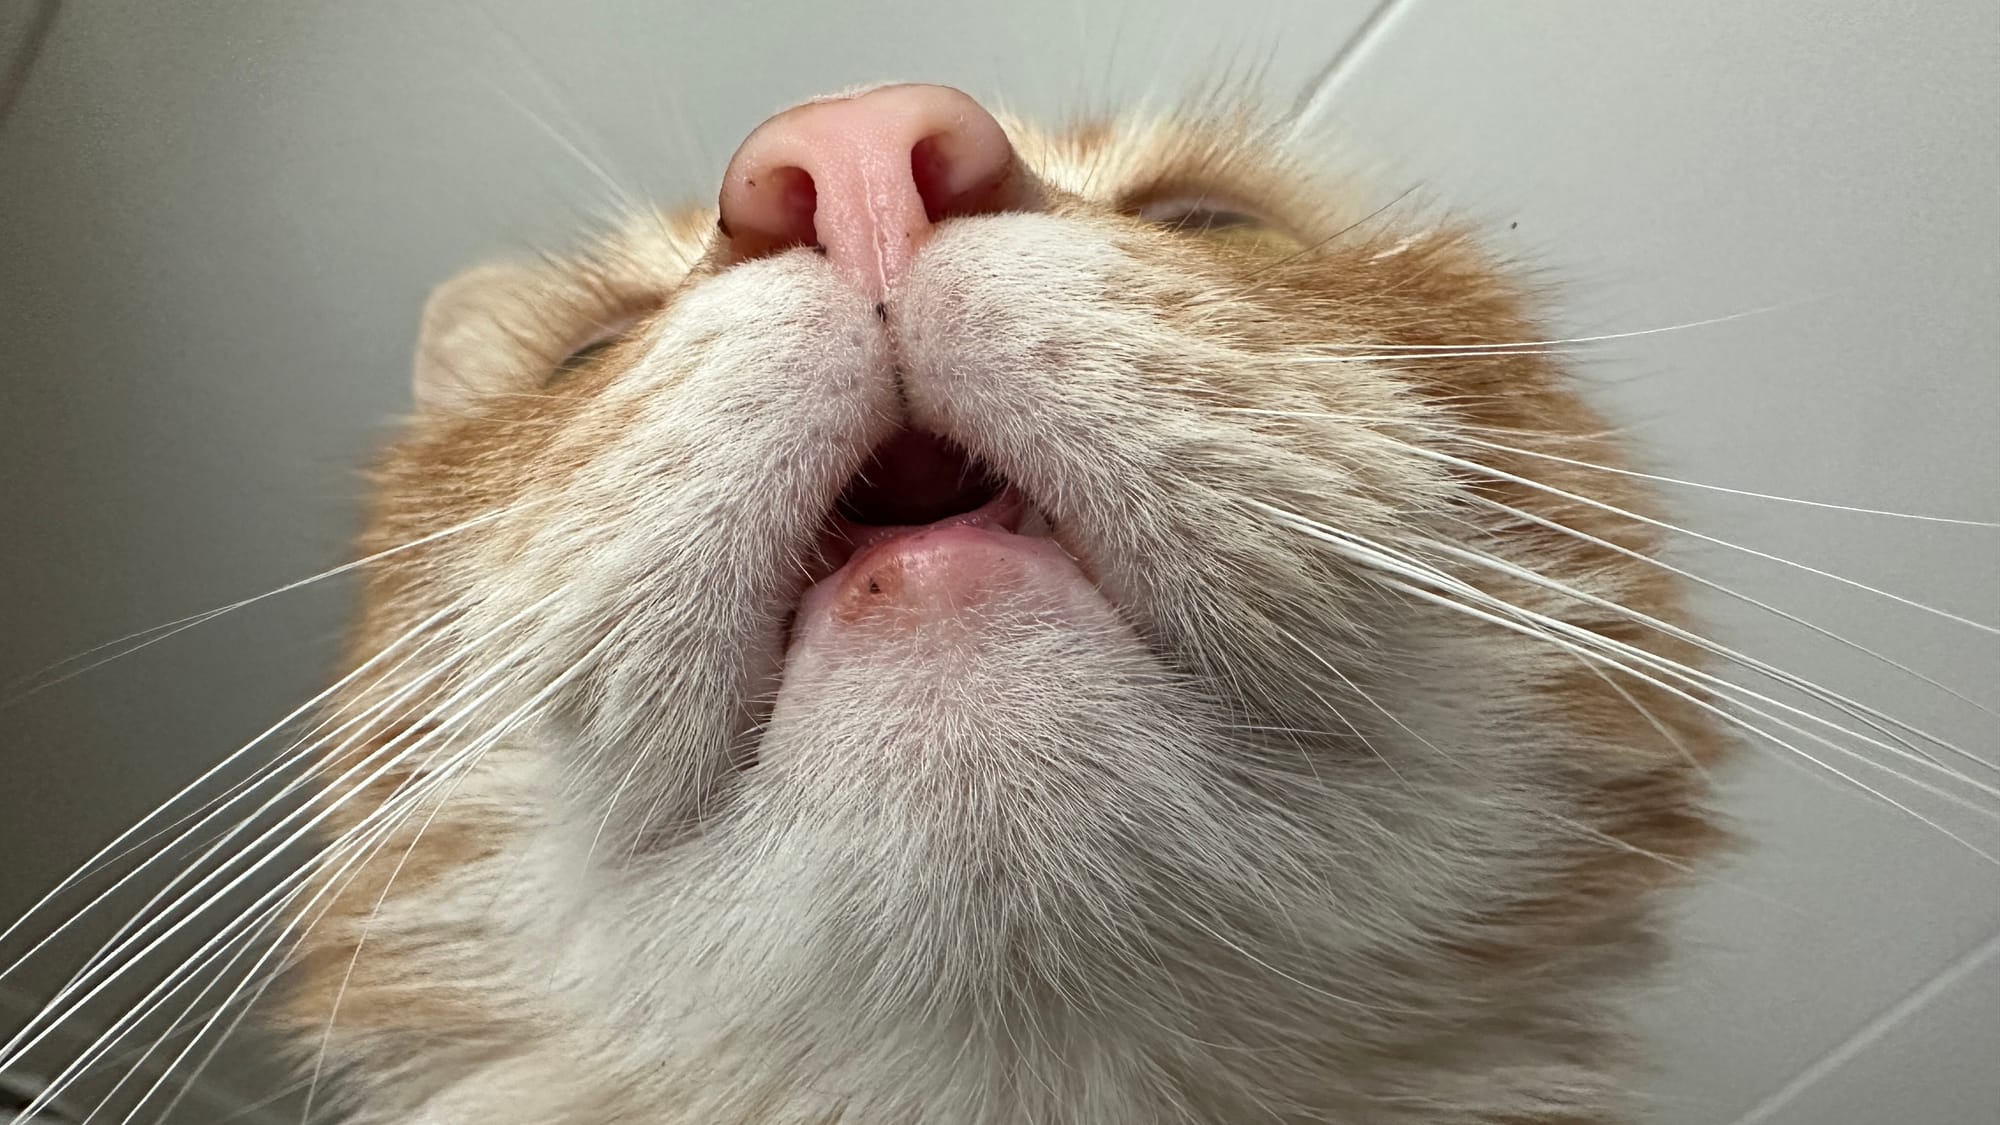 Noses and teefs